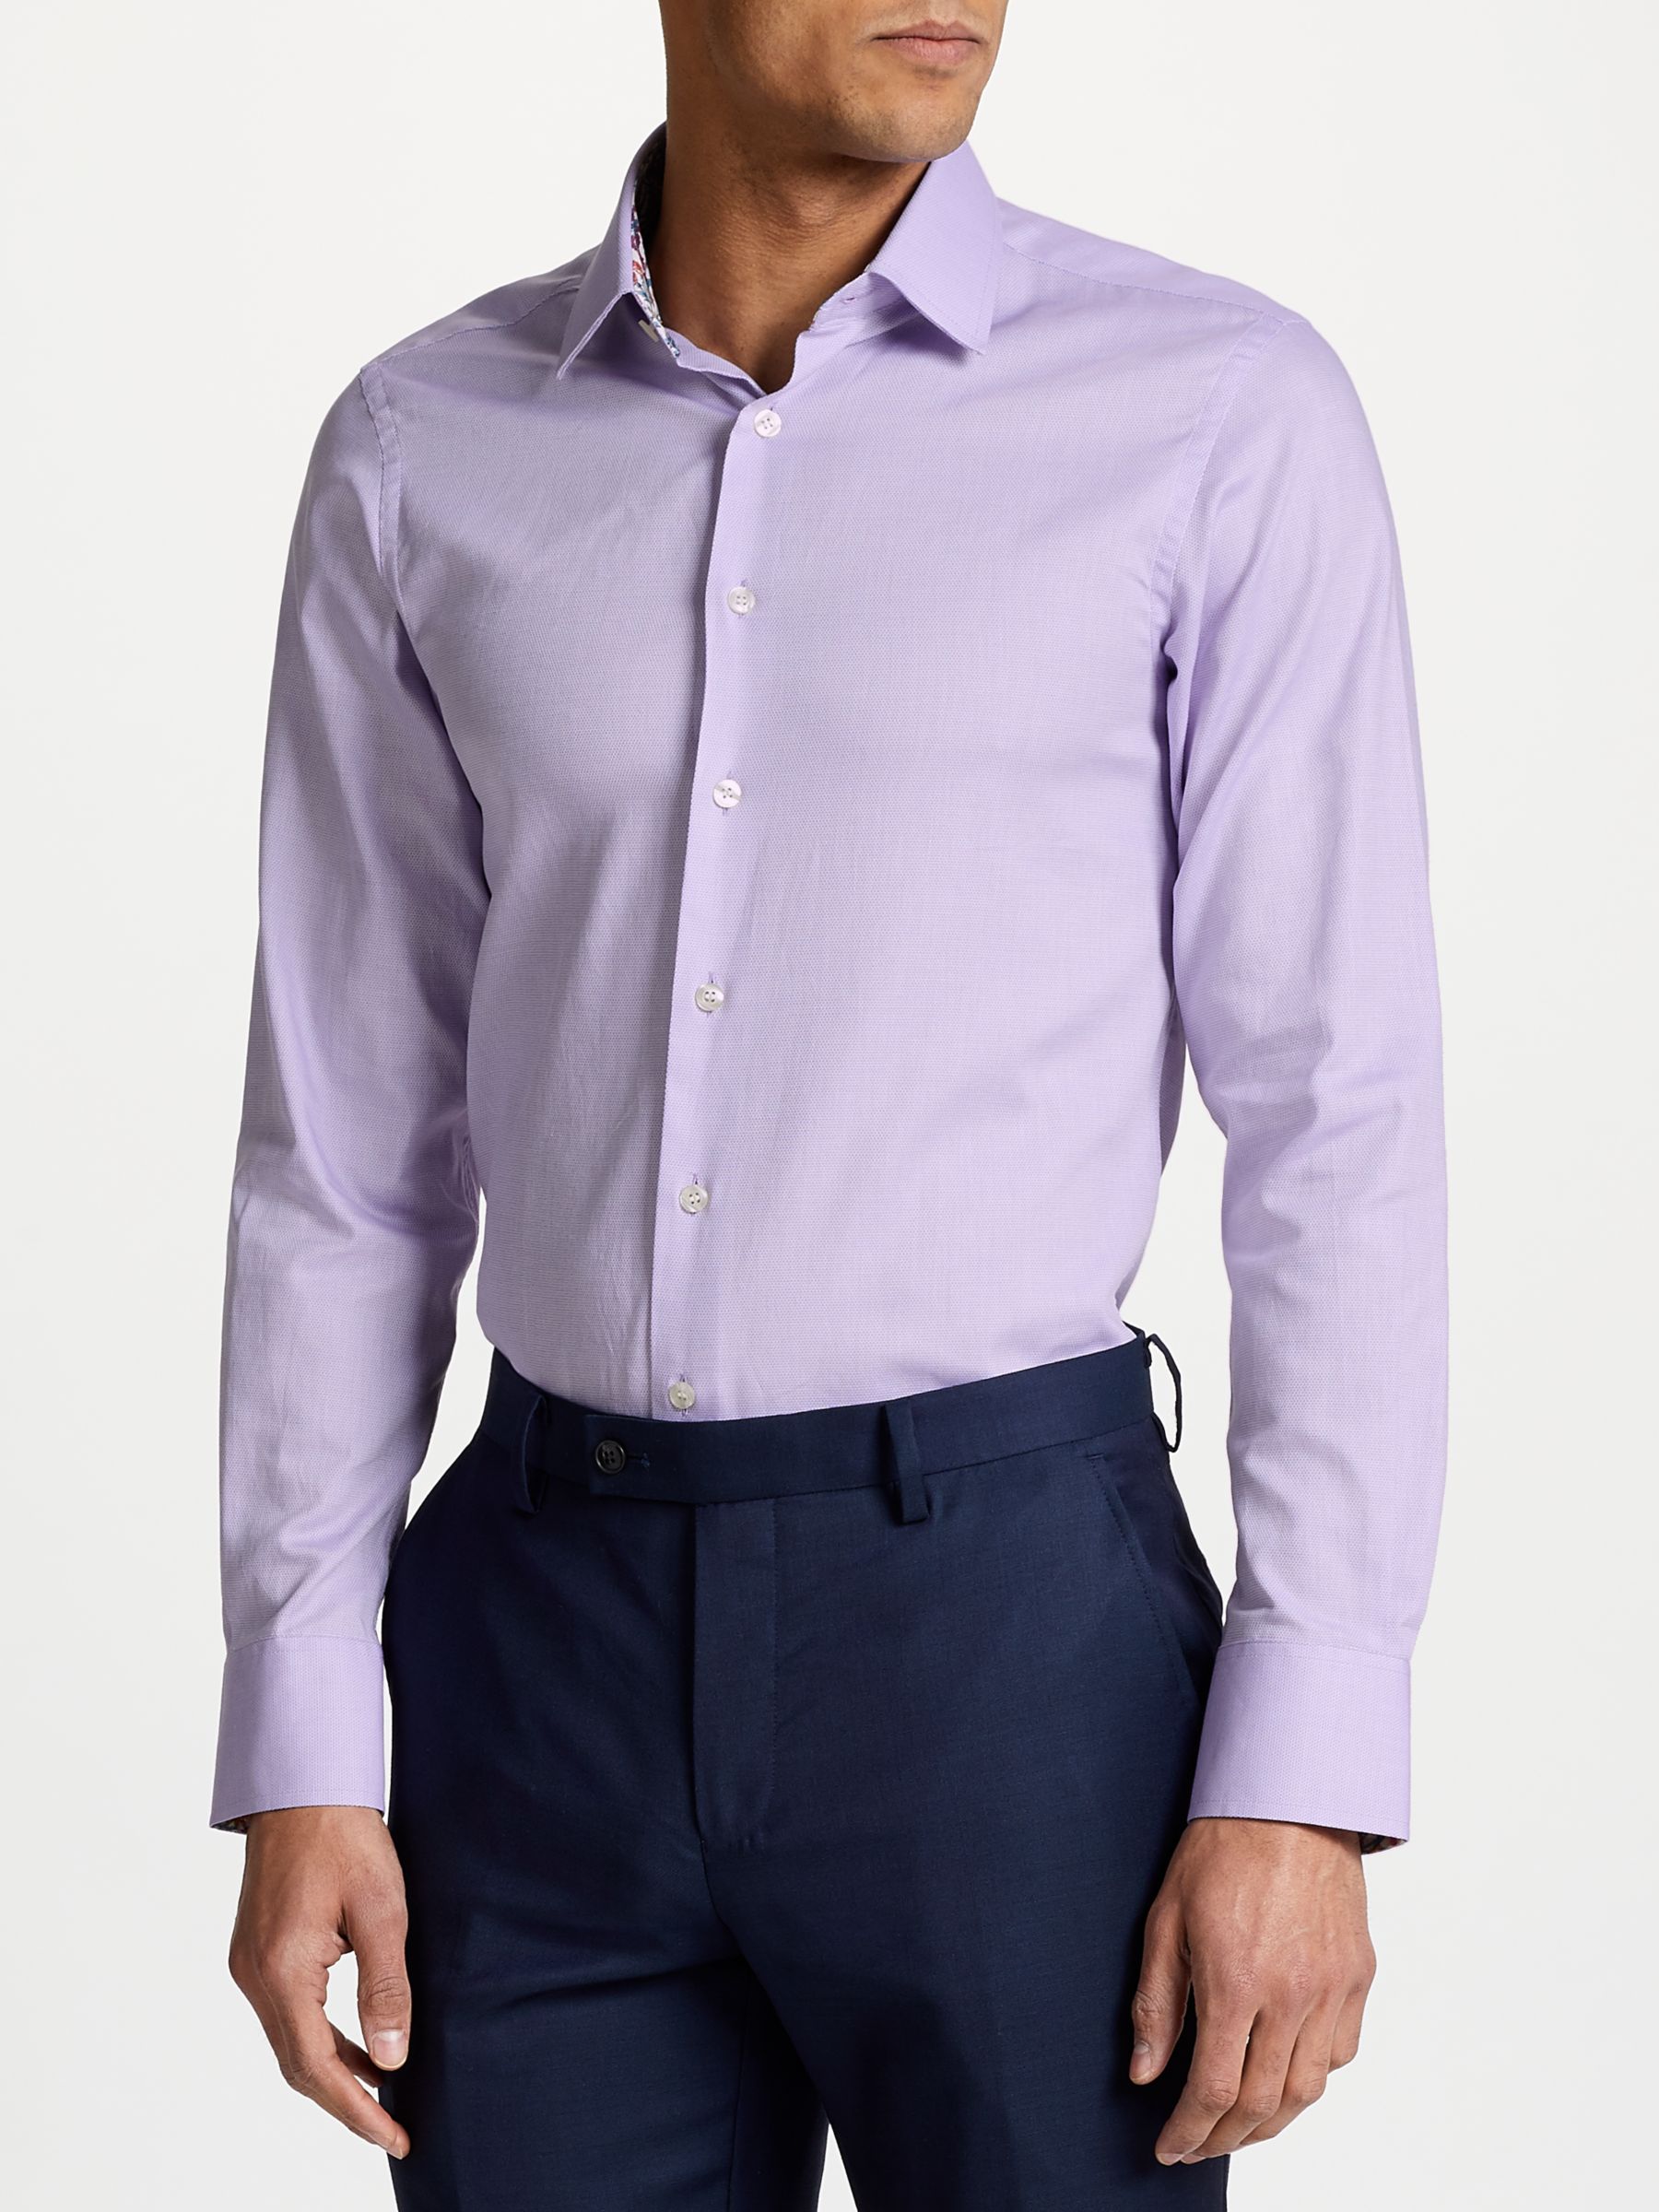 Smyth & Gibson Circle Weave 100s Cotton Slim Fit Shirt, Lilac, 15.5